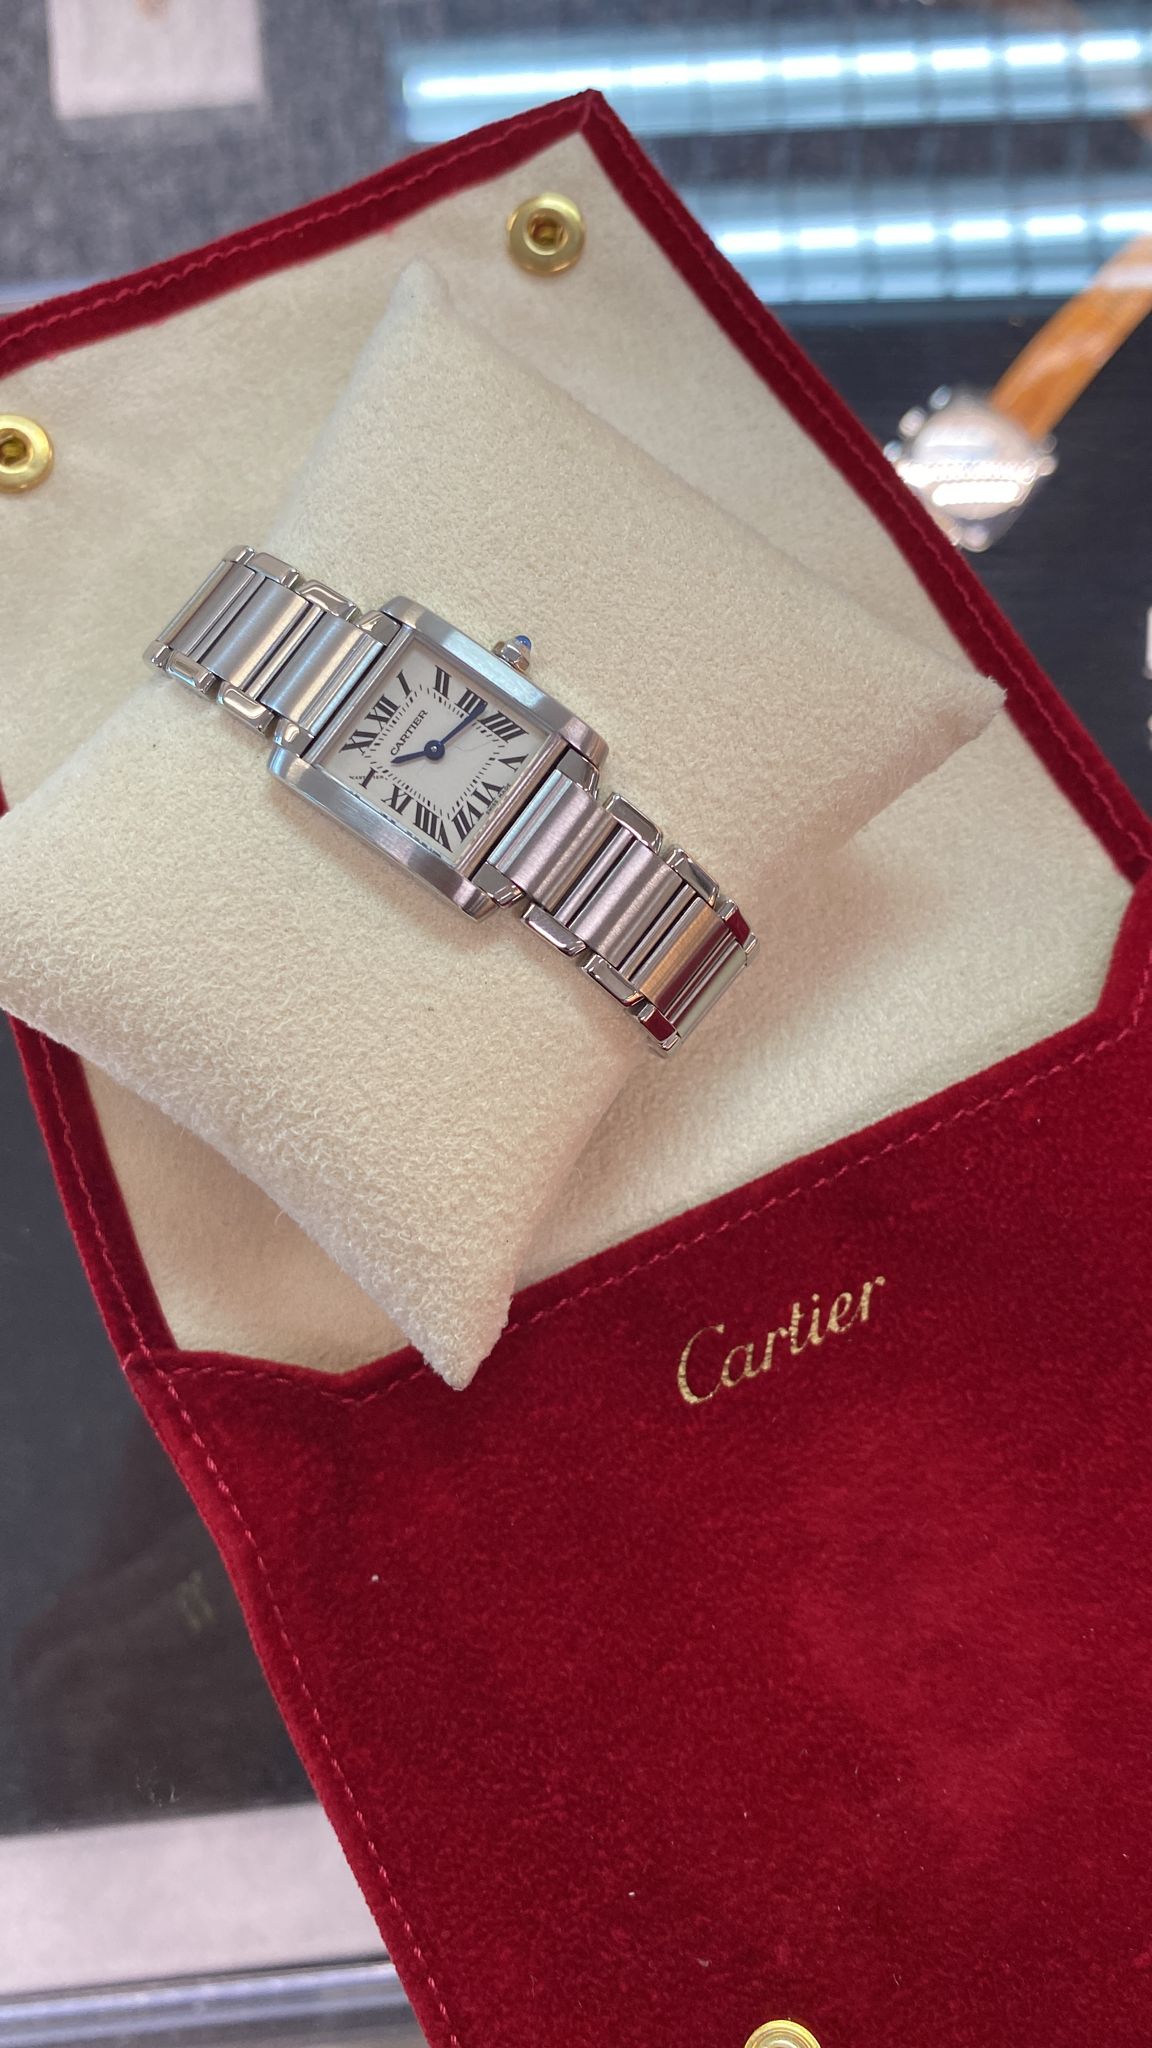 A CARTIER LADIES TANK FRANCAISE STAINLESS STEEL WATCH - Image 4 of 7